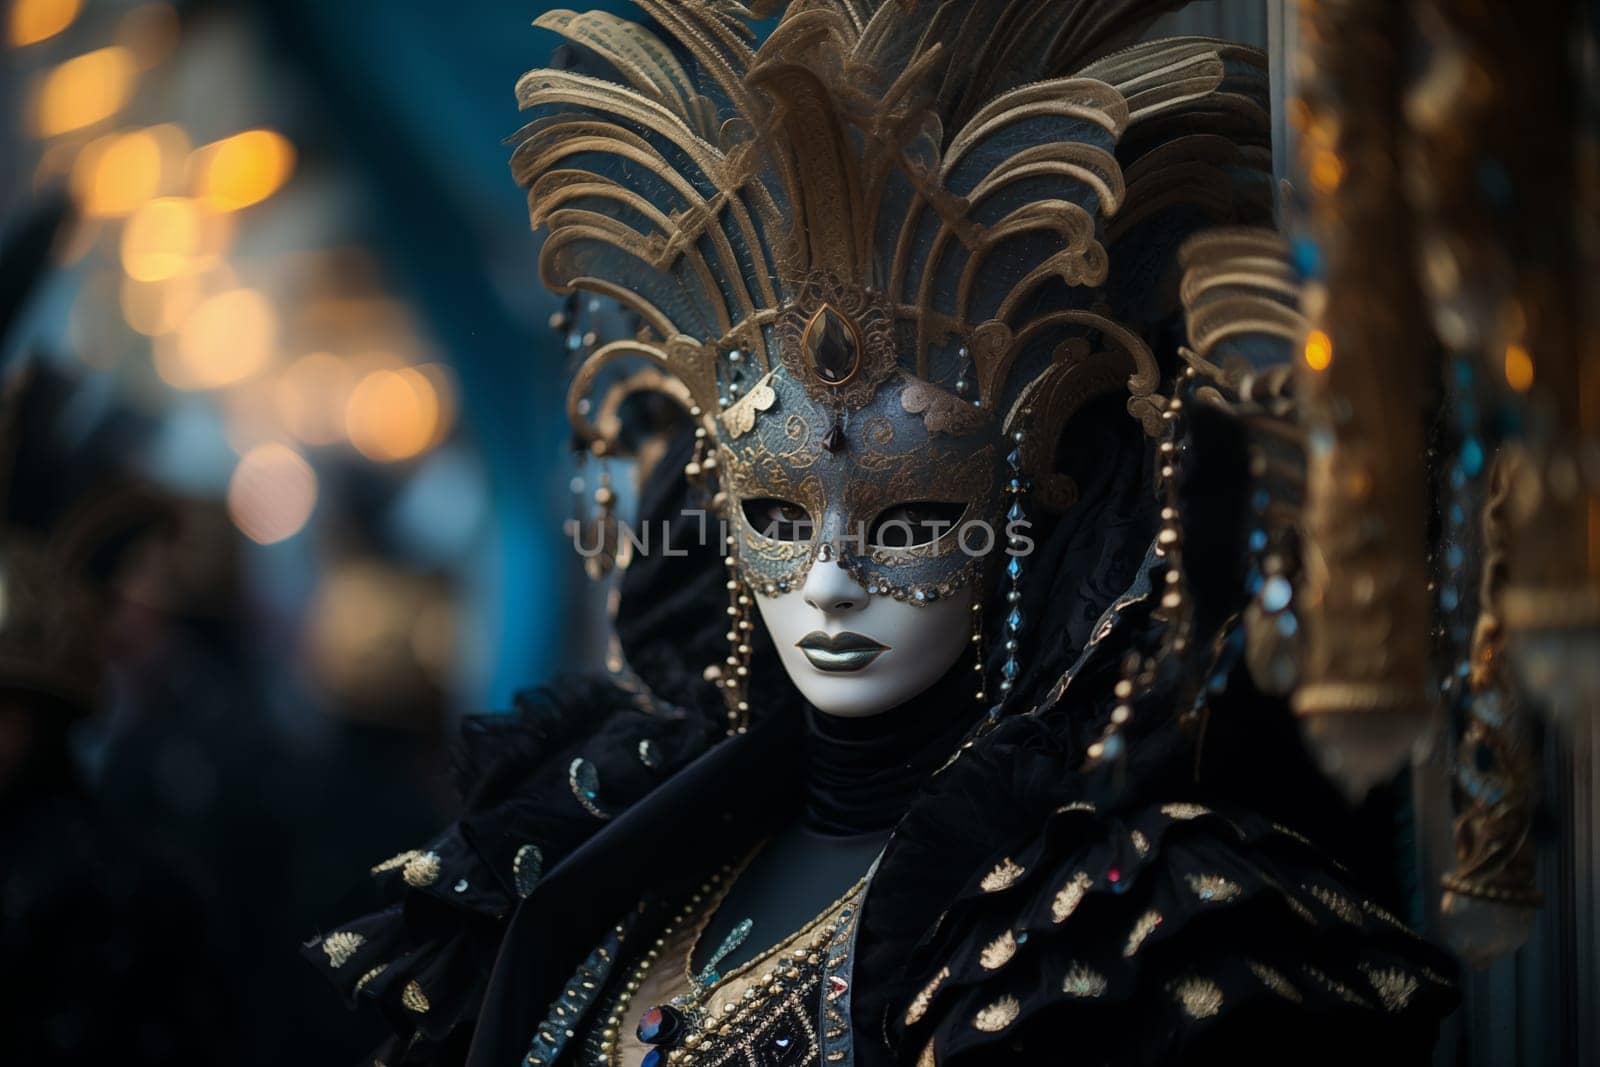 Elegant Person in Ornate Mask and Costume at Venice Carnival by dimol